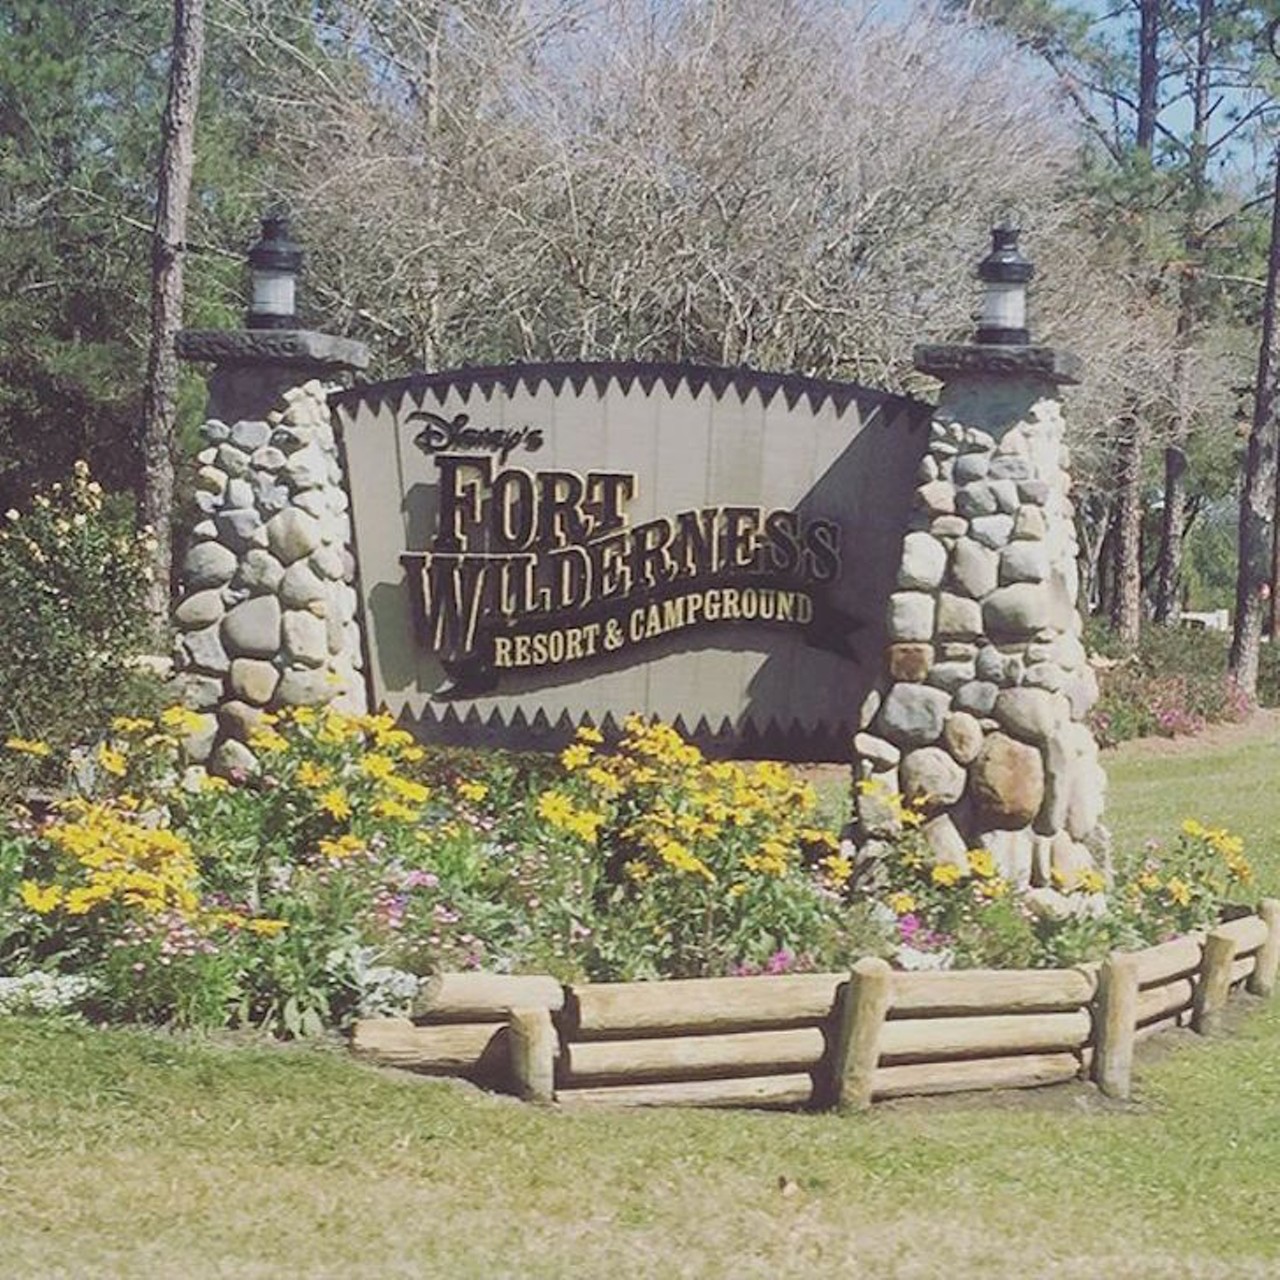 Camp at Fort Wilderness to get Fastpasses early
Fastpasses are prized possessions that can make or break a vacation. Without a fastpass good luck on meeting Anna and Elsa or riding that new Frozen ride that&#146;s opening this summer. So if there&#146;s one you must have but don&#146;t want to drop three grand a night on a Polynesian bungalow you can follow some desperate vacation goers by renting a camping site at Fort Wilderness. The camping sites mean you&#146;ll get the earlier on-site Fastpass booking window. That can mean the difference between no wait and spending your entire afternoon to ride a minute long miniature mine train coaster. 
Photo via juliaa_darlene/Instagram